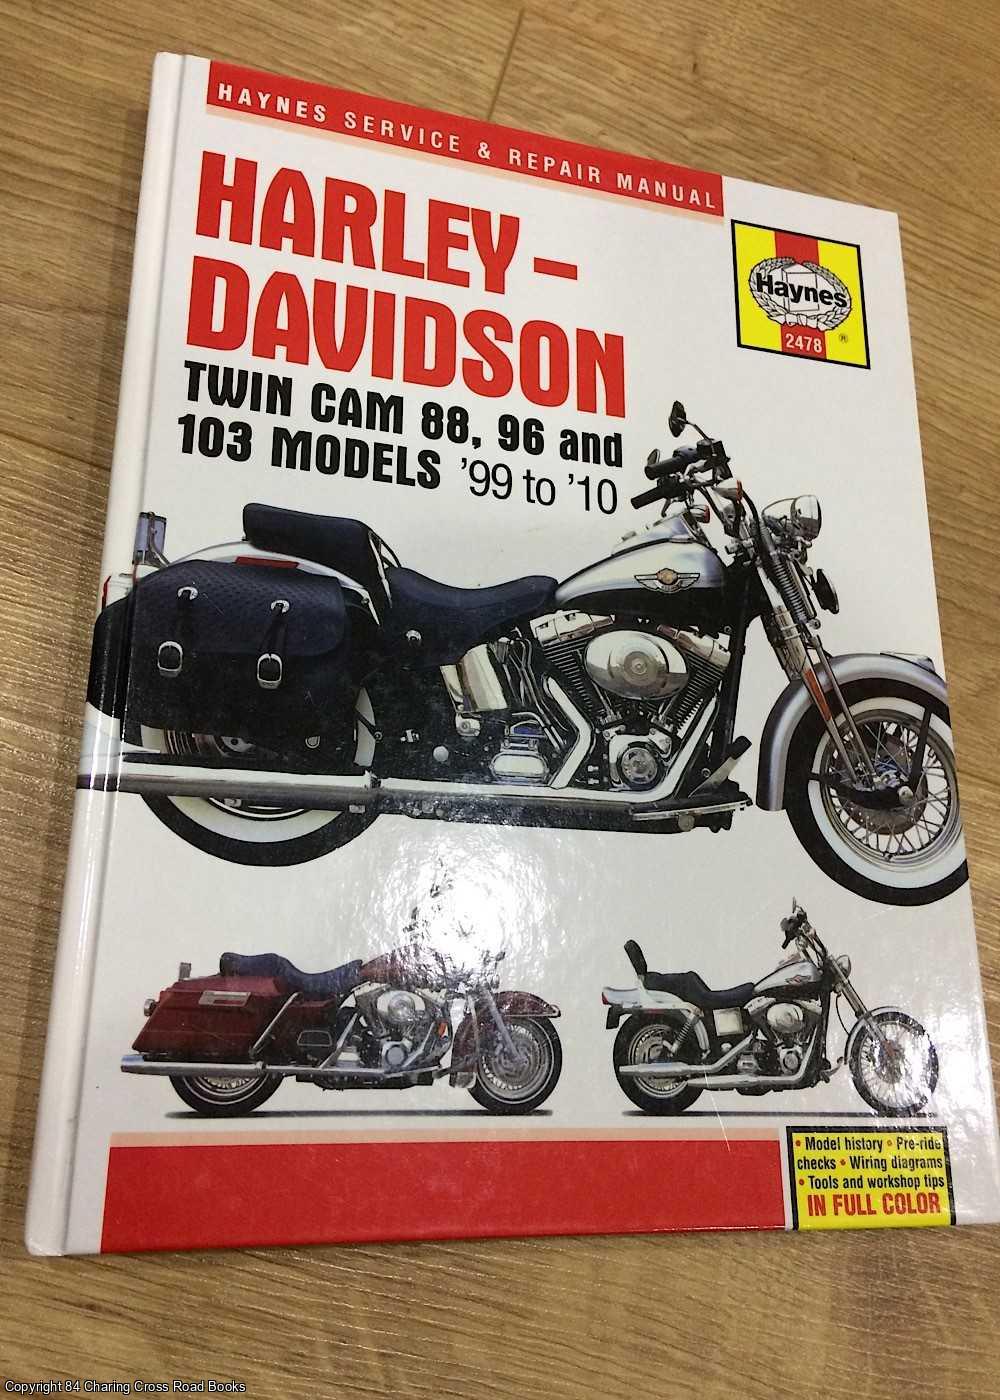 Alan Ahlstrand - Harley-Davidson: Twin Cam 88, 96 and 103 Models '99 to '10